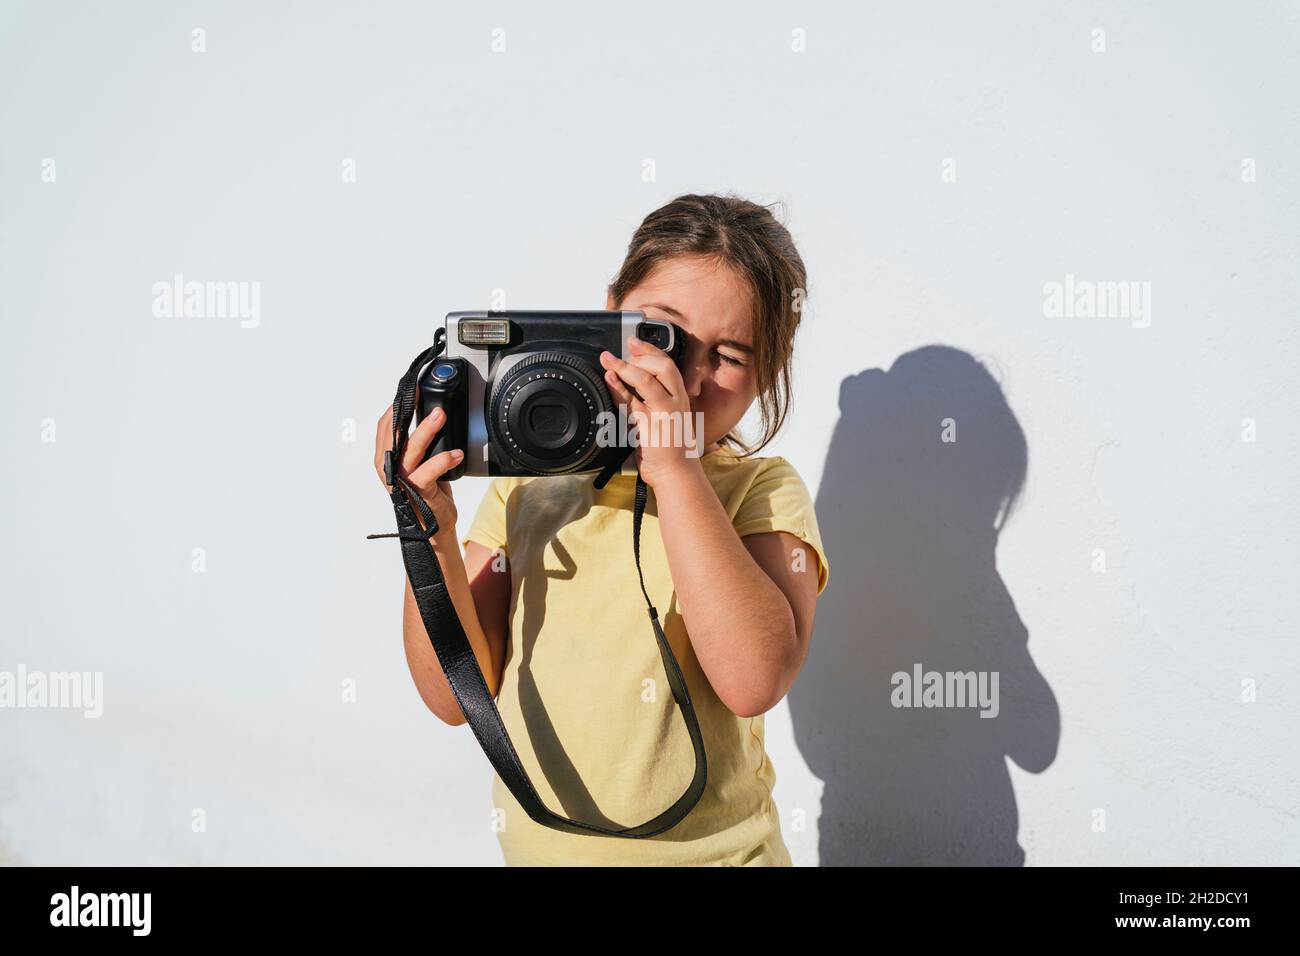 Young girl taking photo with instant camera Stock Photo